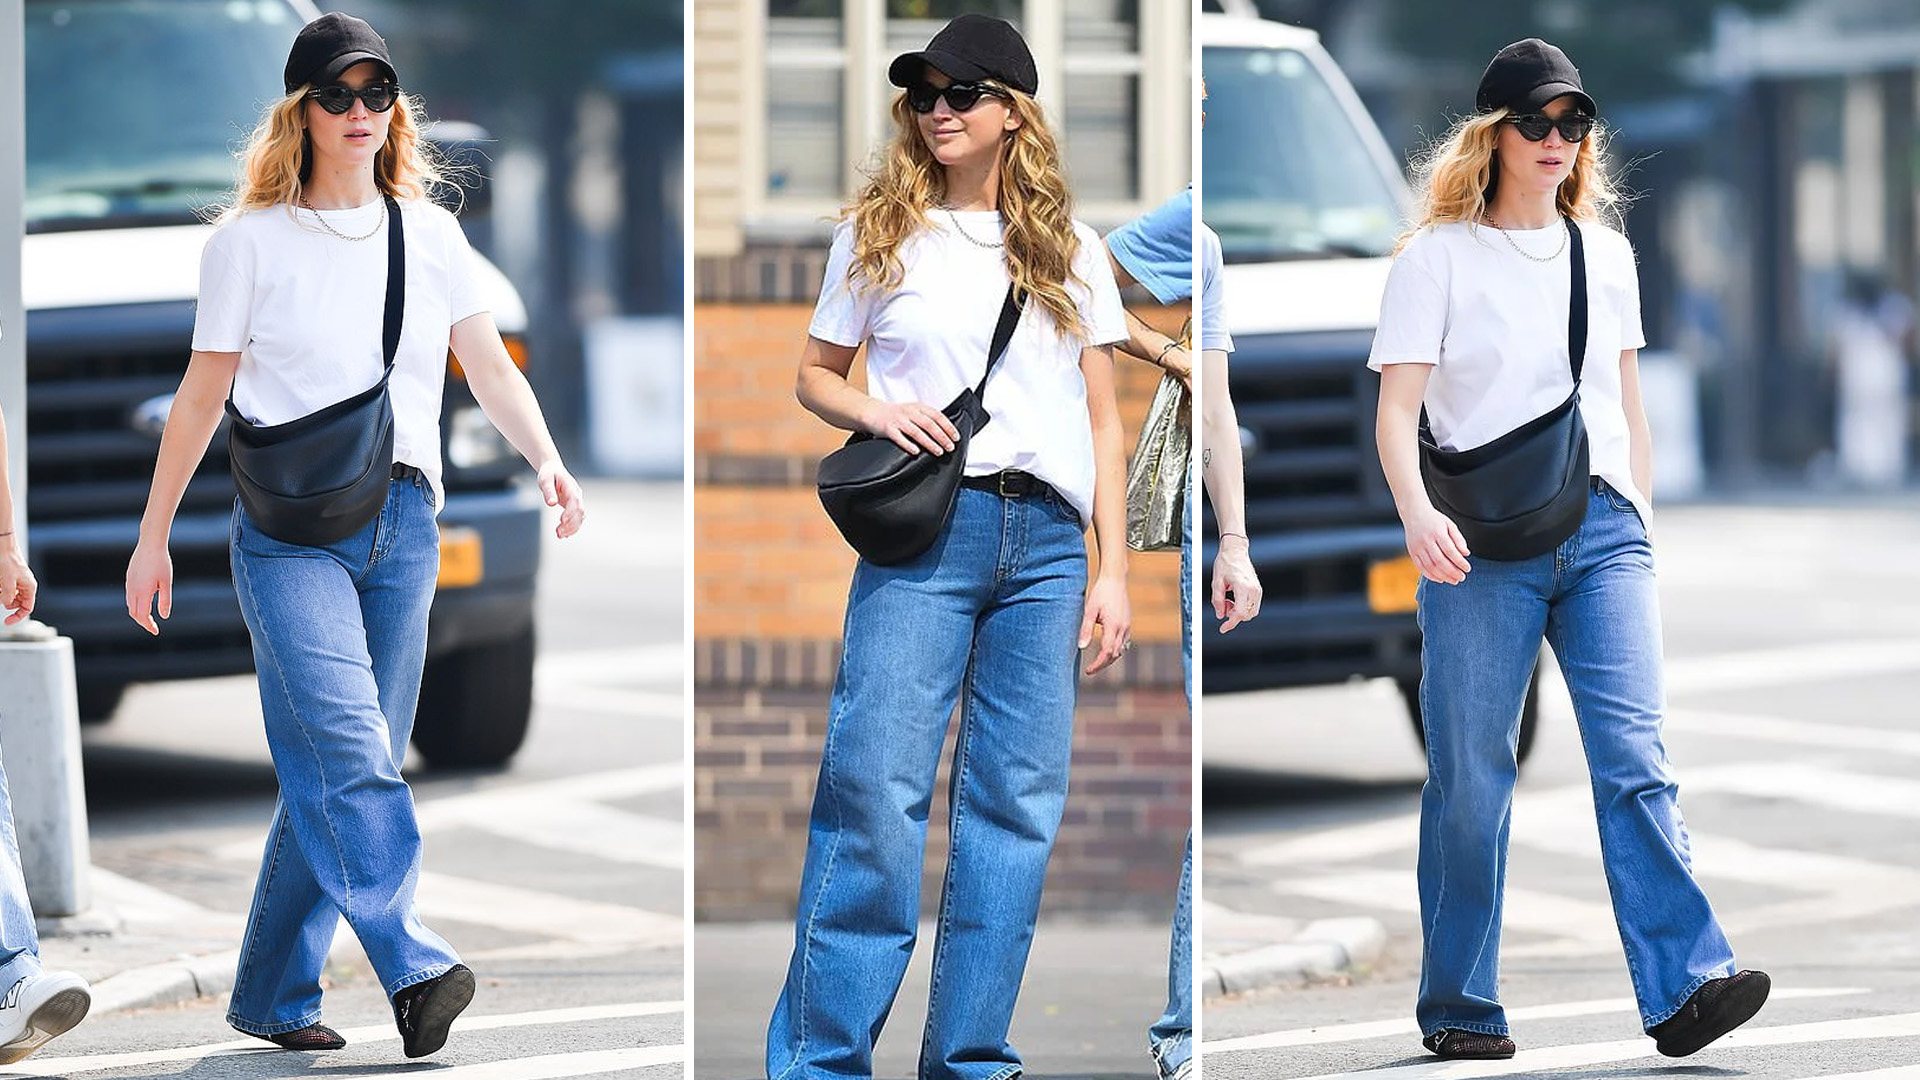 Jennifer Lawrence Spotted In Sports T-Shirt and Jeans.